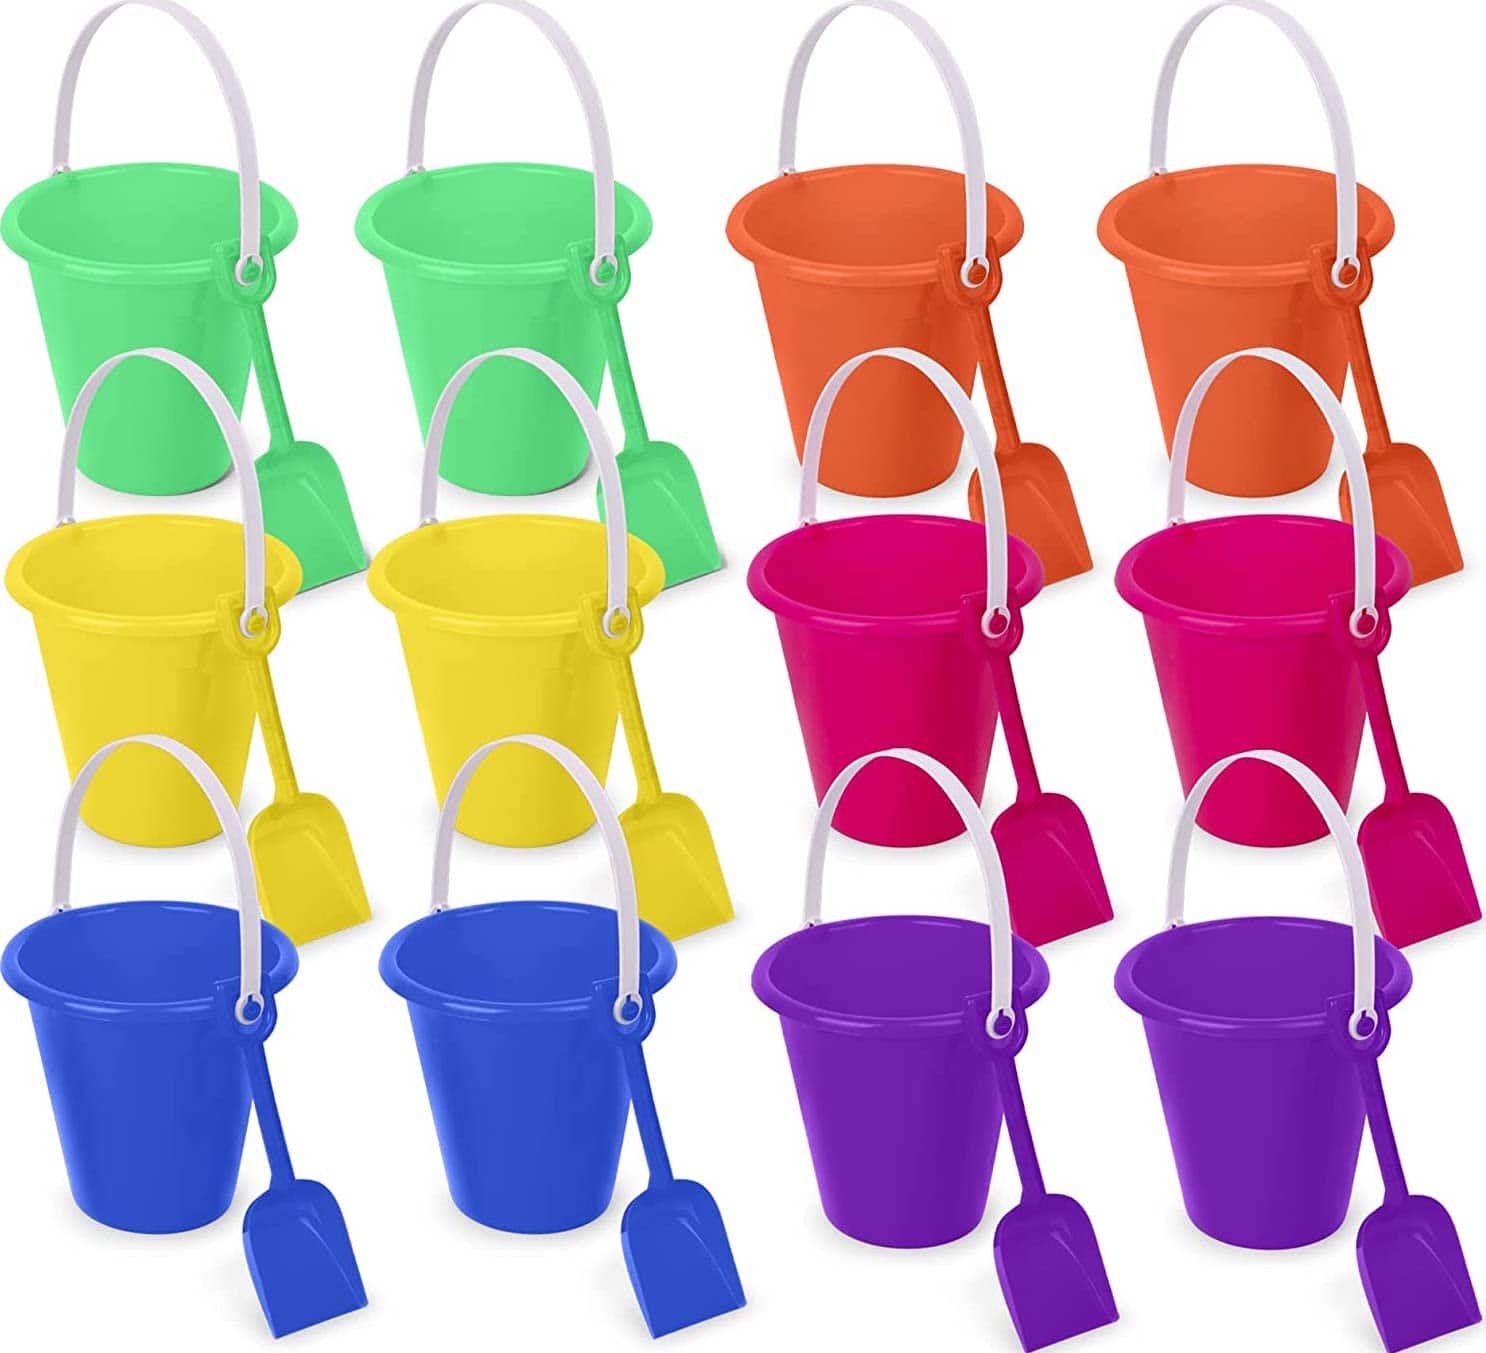 Sand buckets and shovels in a variety of colors 